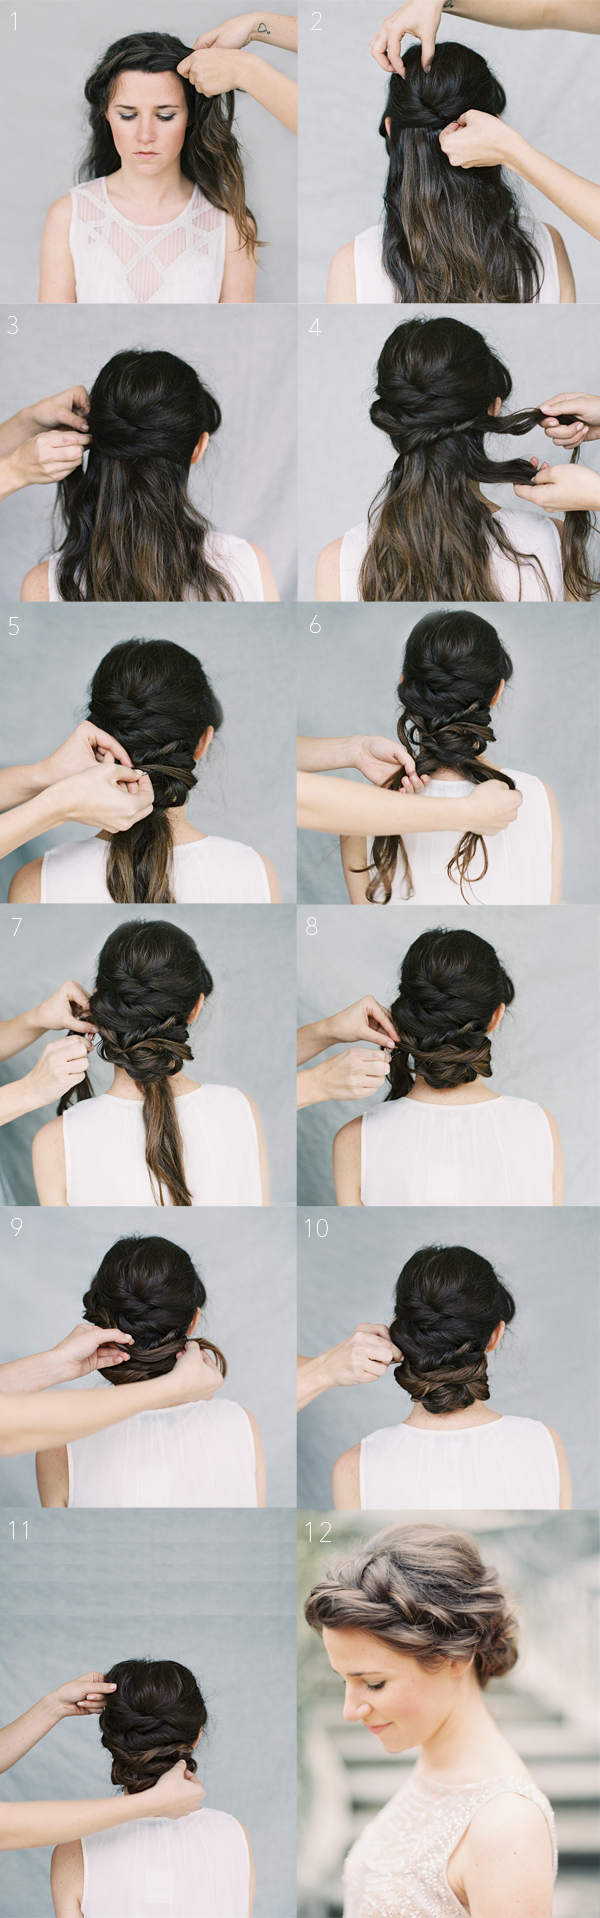 20 beautiful hairstyles for long hair step by step